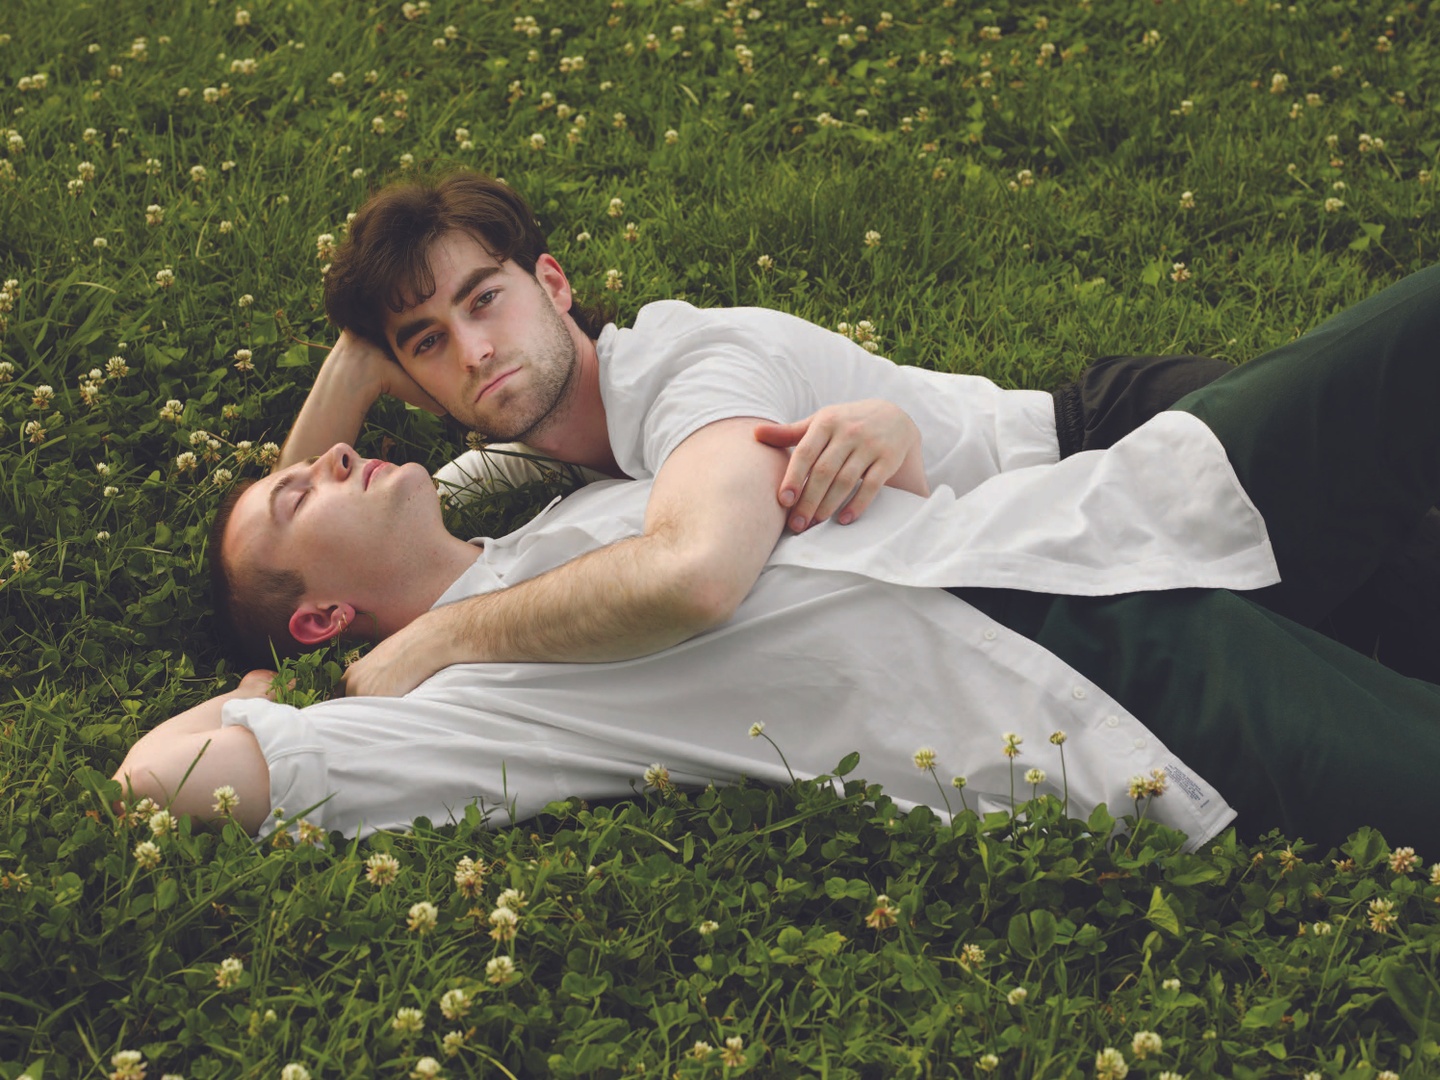 Two figures dressed in white shirts lie in each other's arms on the grass